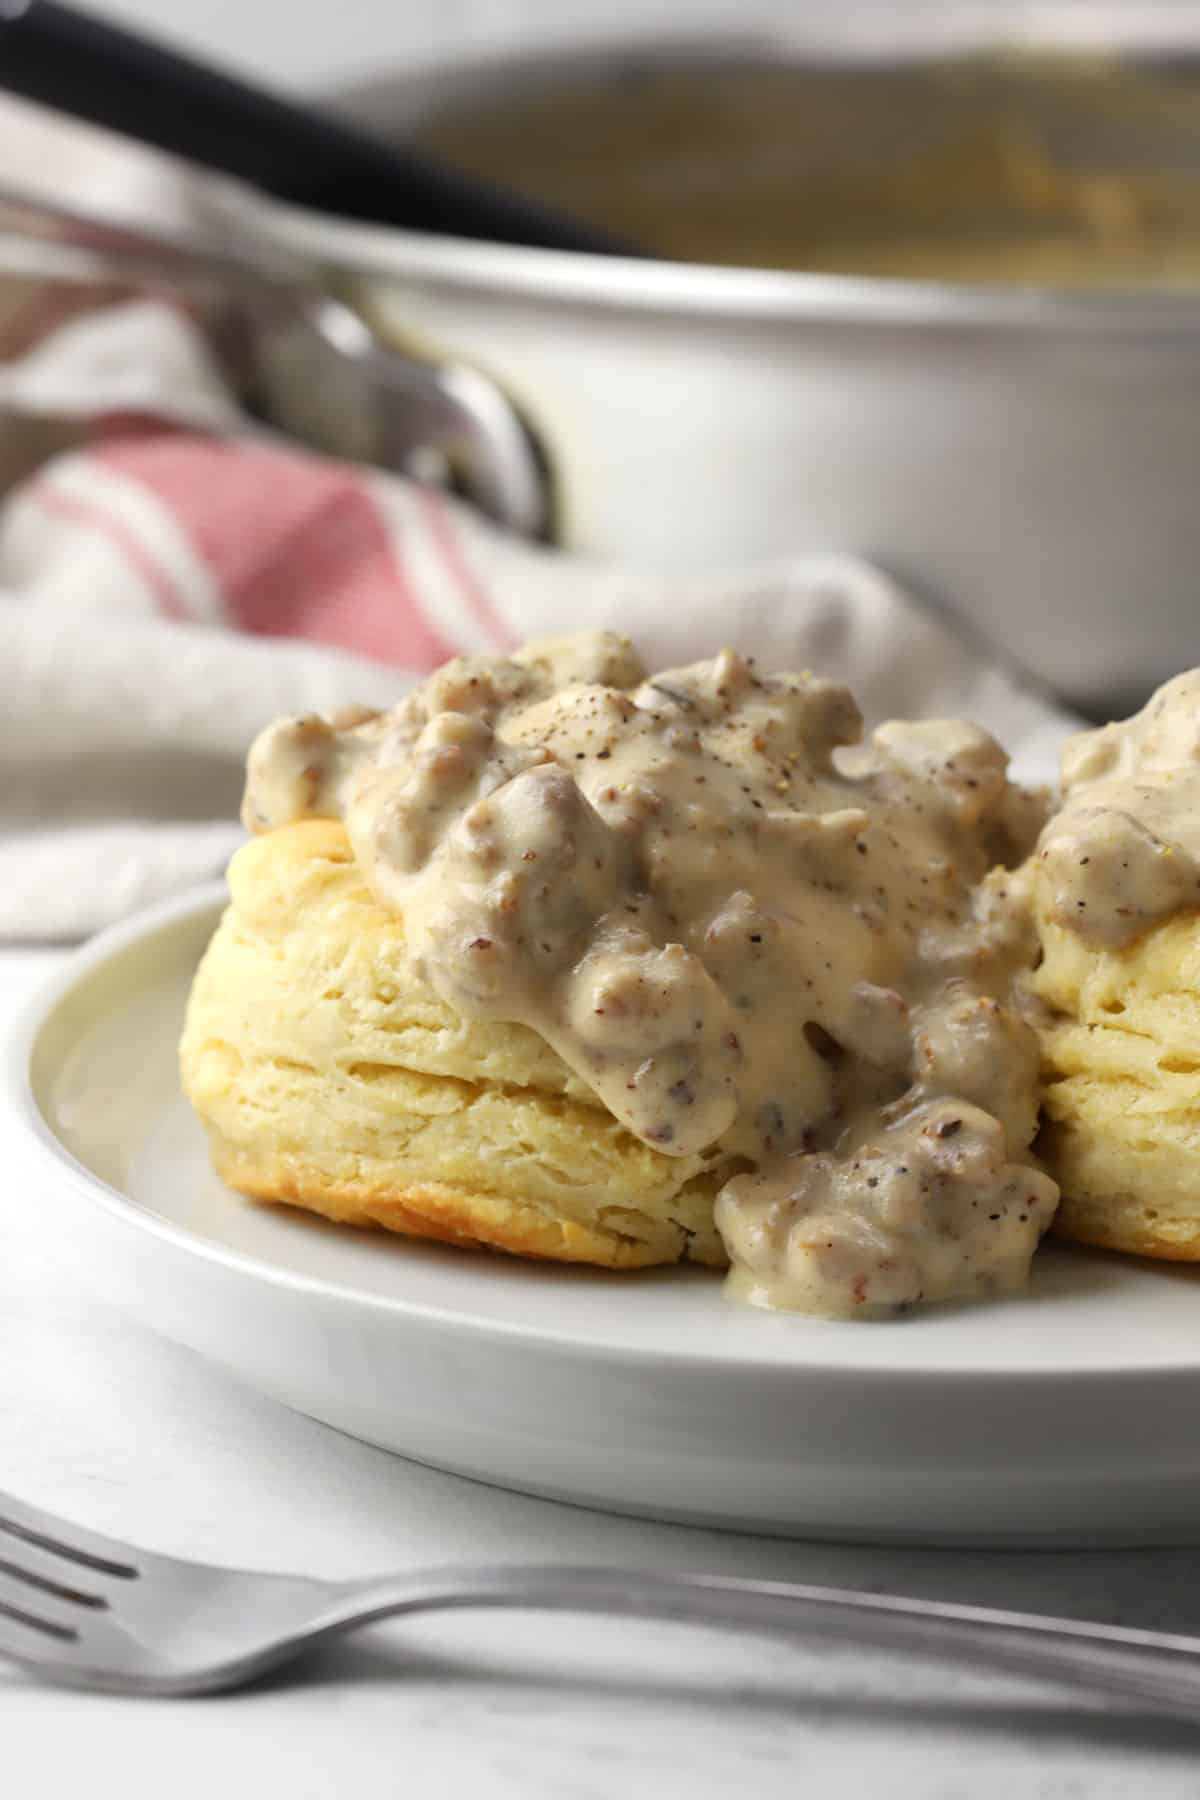 A fluffy buttermilk biscuit smothered in sausage gravy on a white plate.